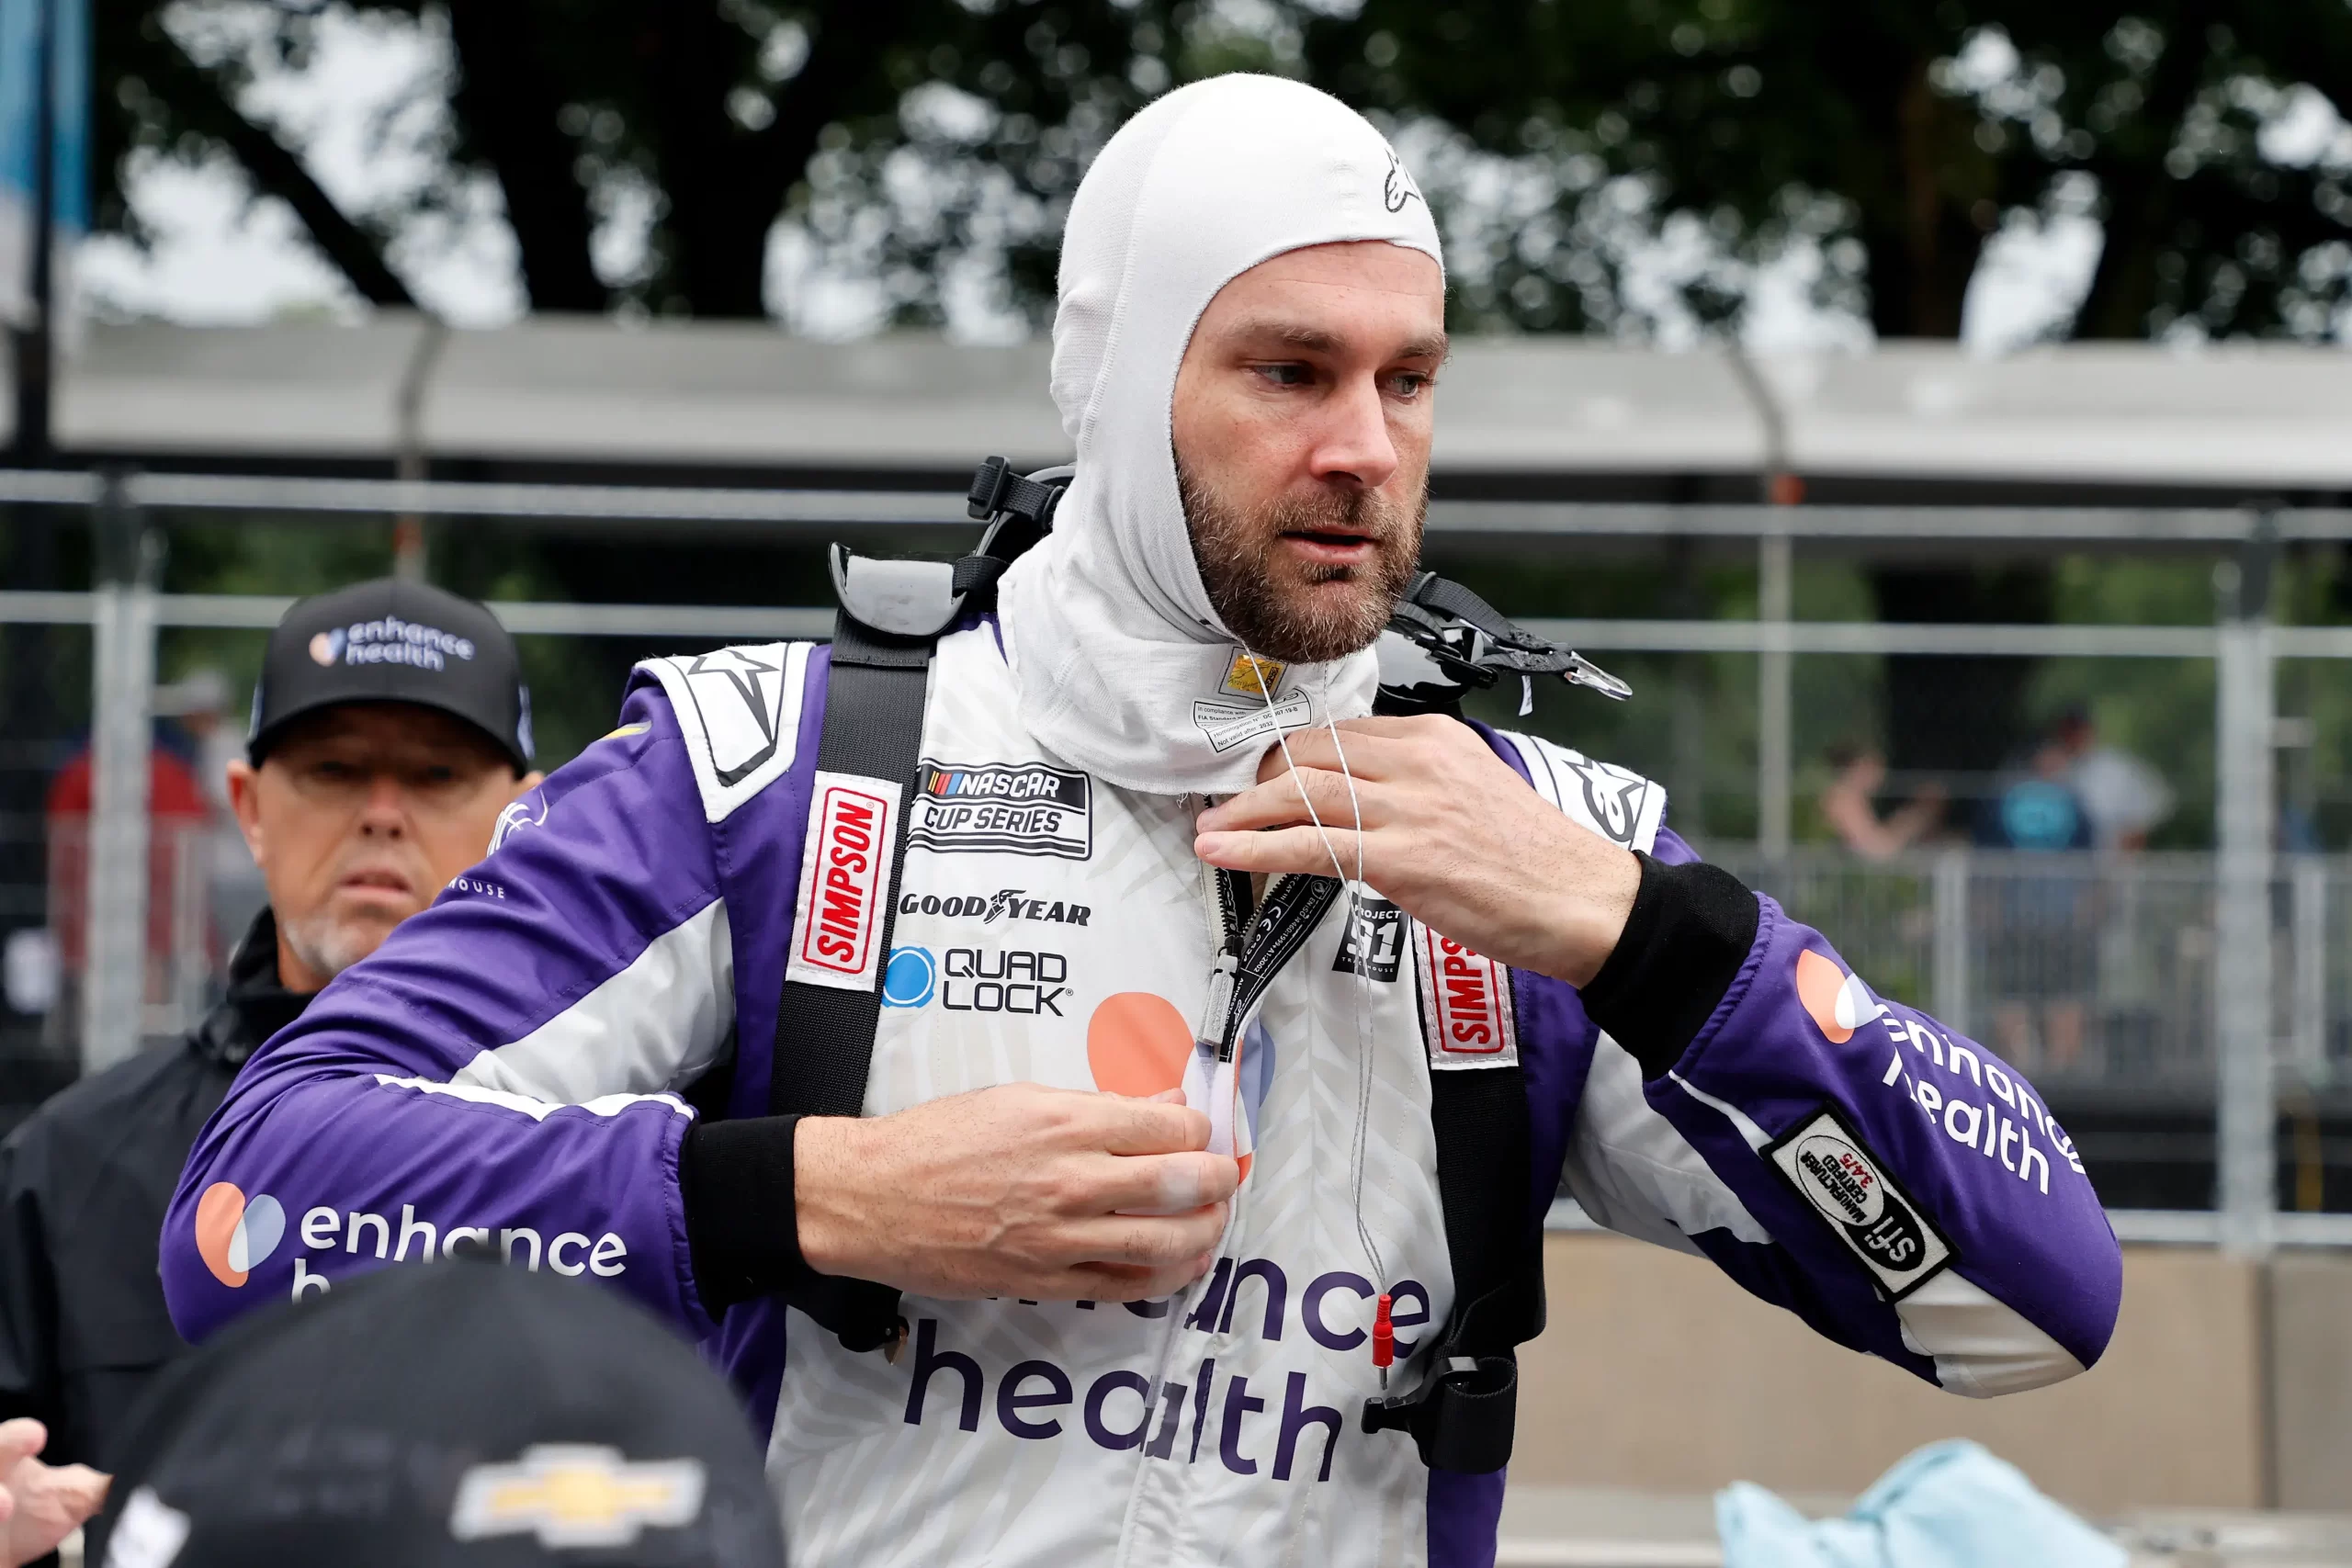 Shane van Gisbergen Makes History with Victory in Wet and Wild Chicago Street Race